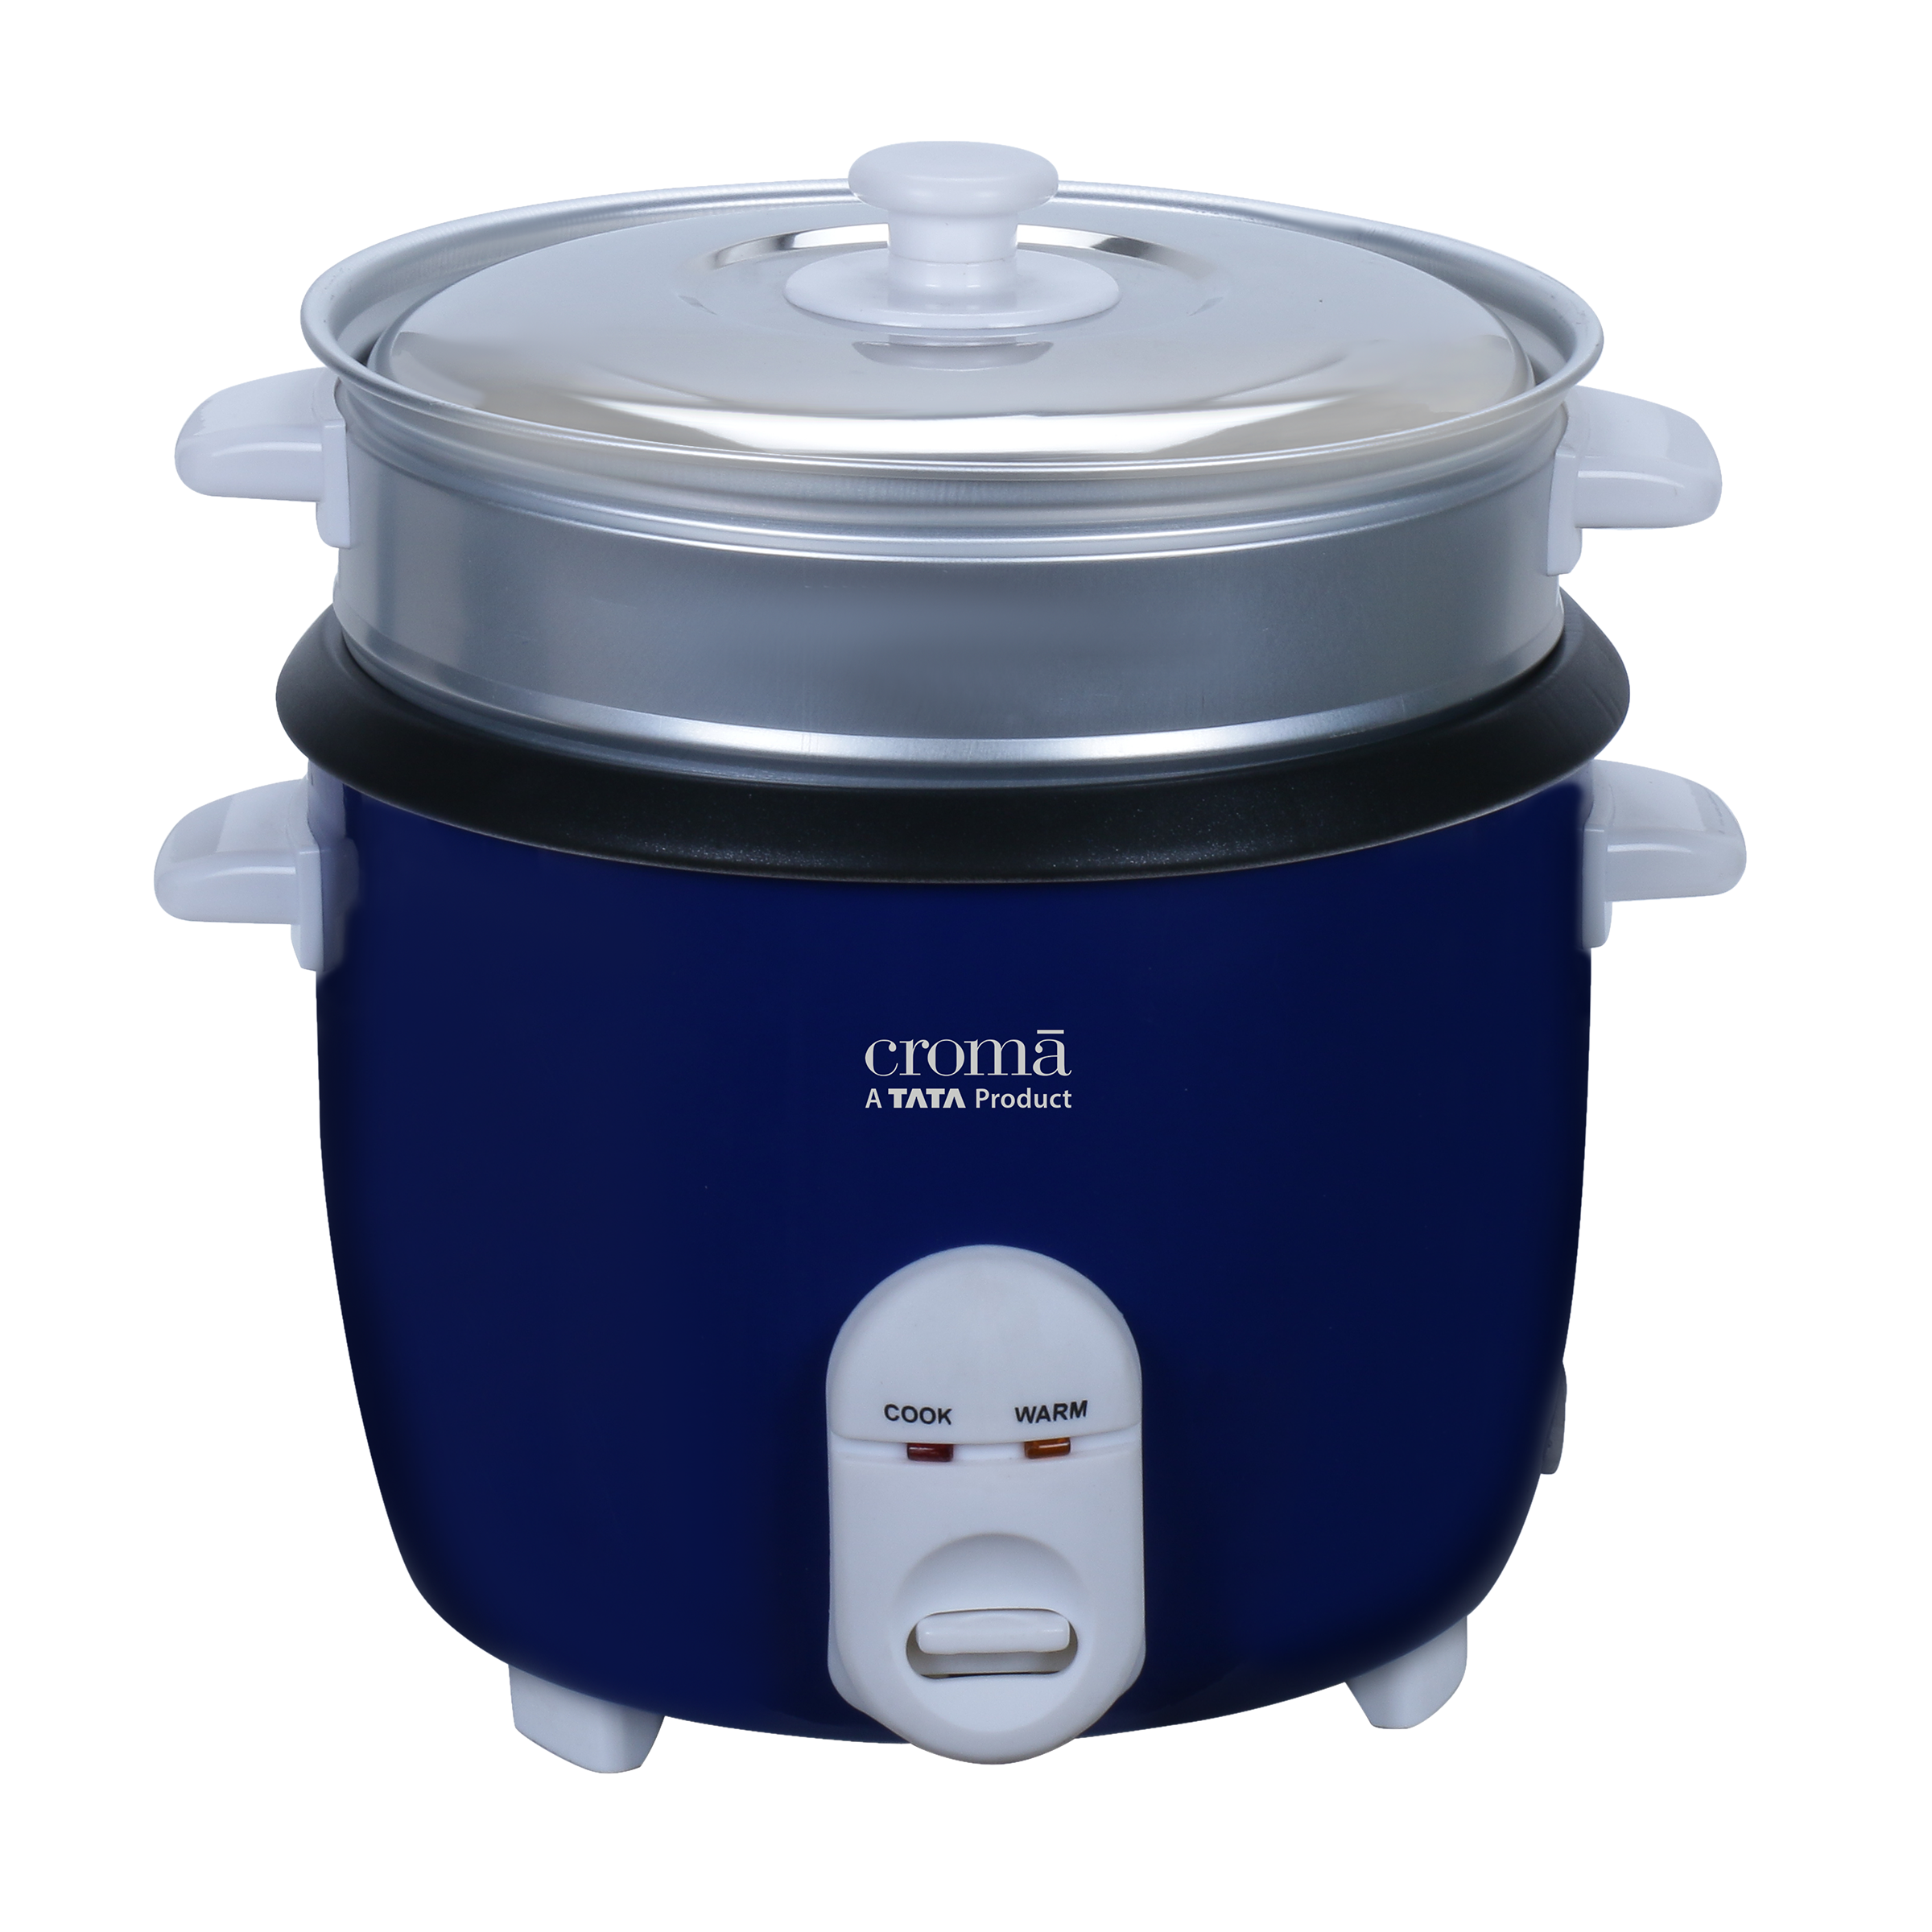 Croma 1.8 Litres Electric Rice Cooker (Overheat Protection, CRSOS18CKA266601, Dark Blue)_1